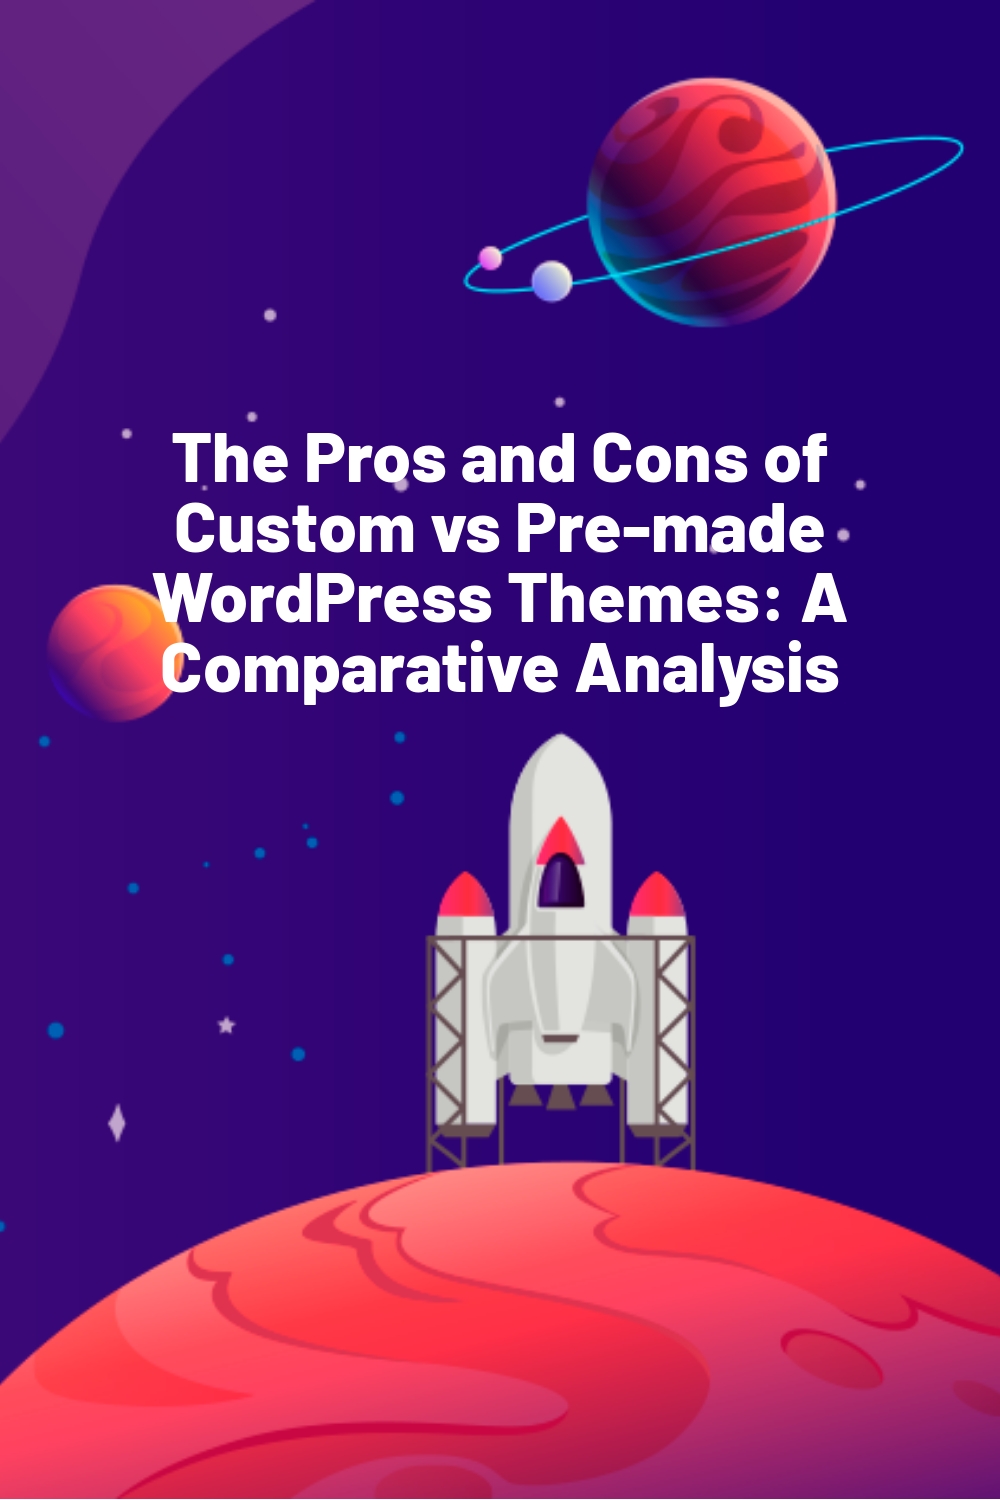 The Pros and Cons of Custom vs Pre-made WordPress Themes: A Comparative Analysis